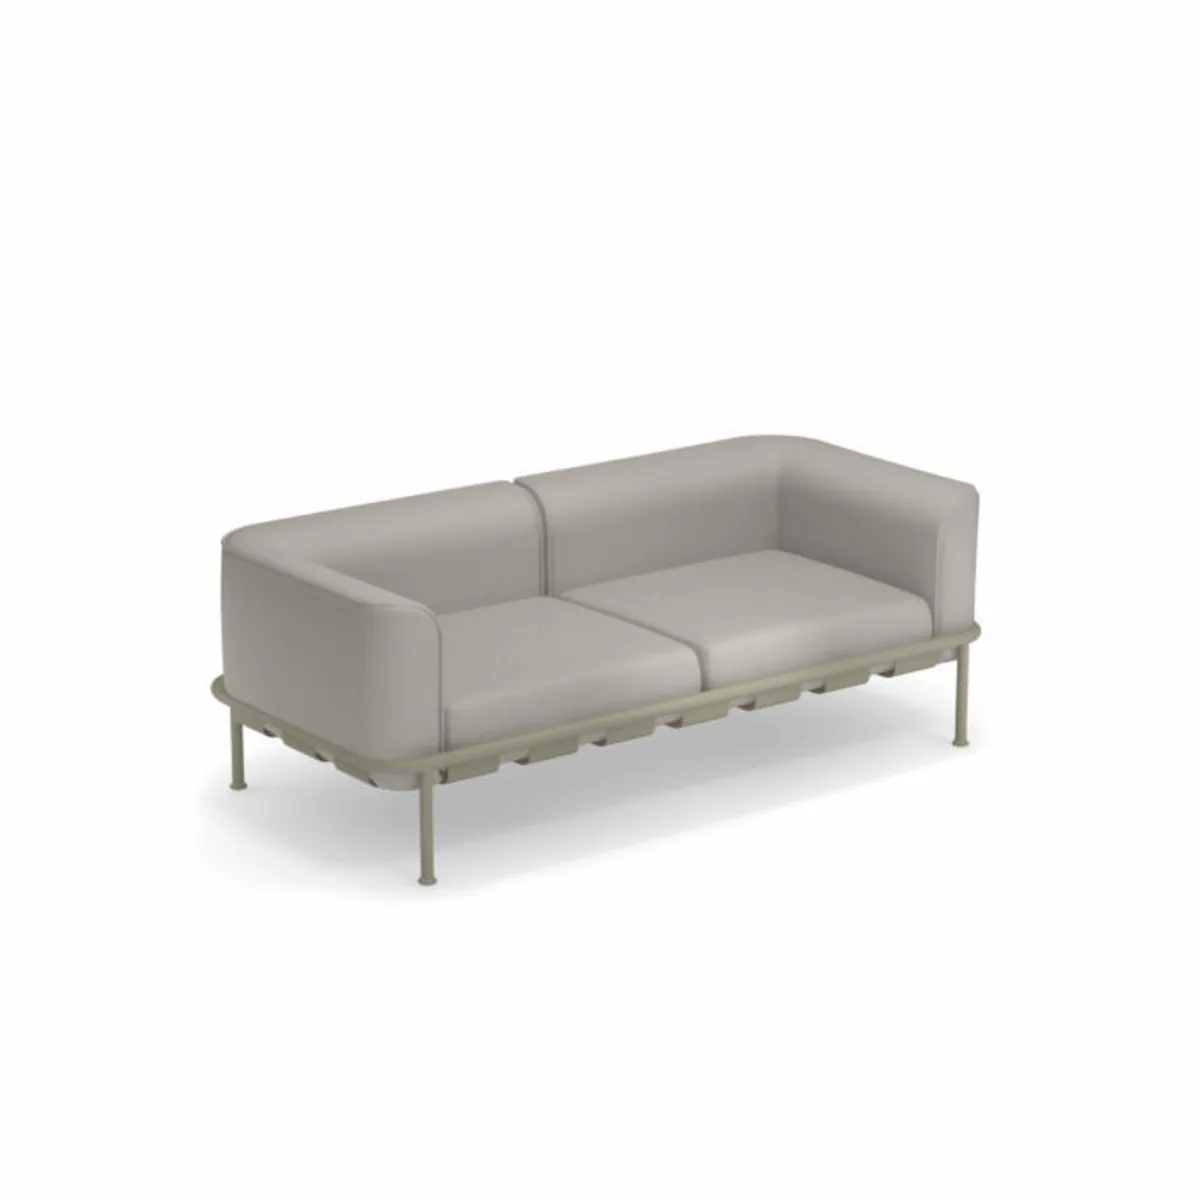 Dock 2 Seater Sofa 37 Outdoor Use Inside Out Contracst